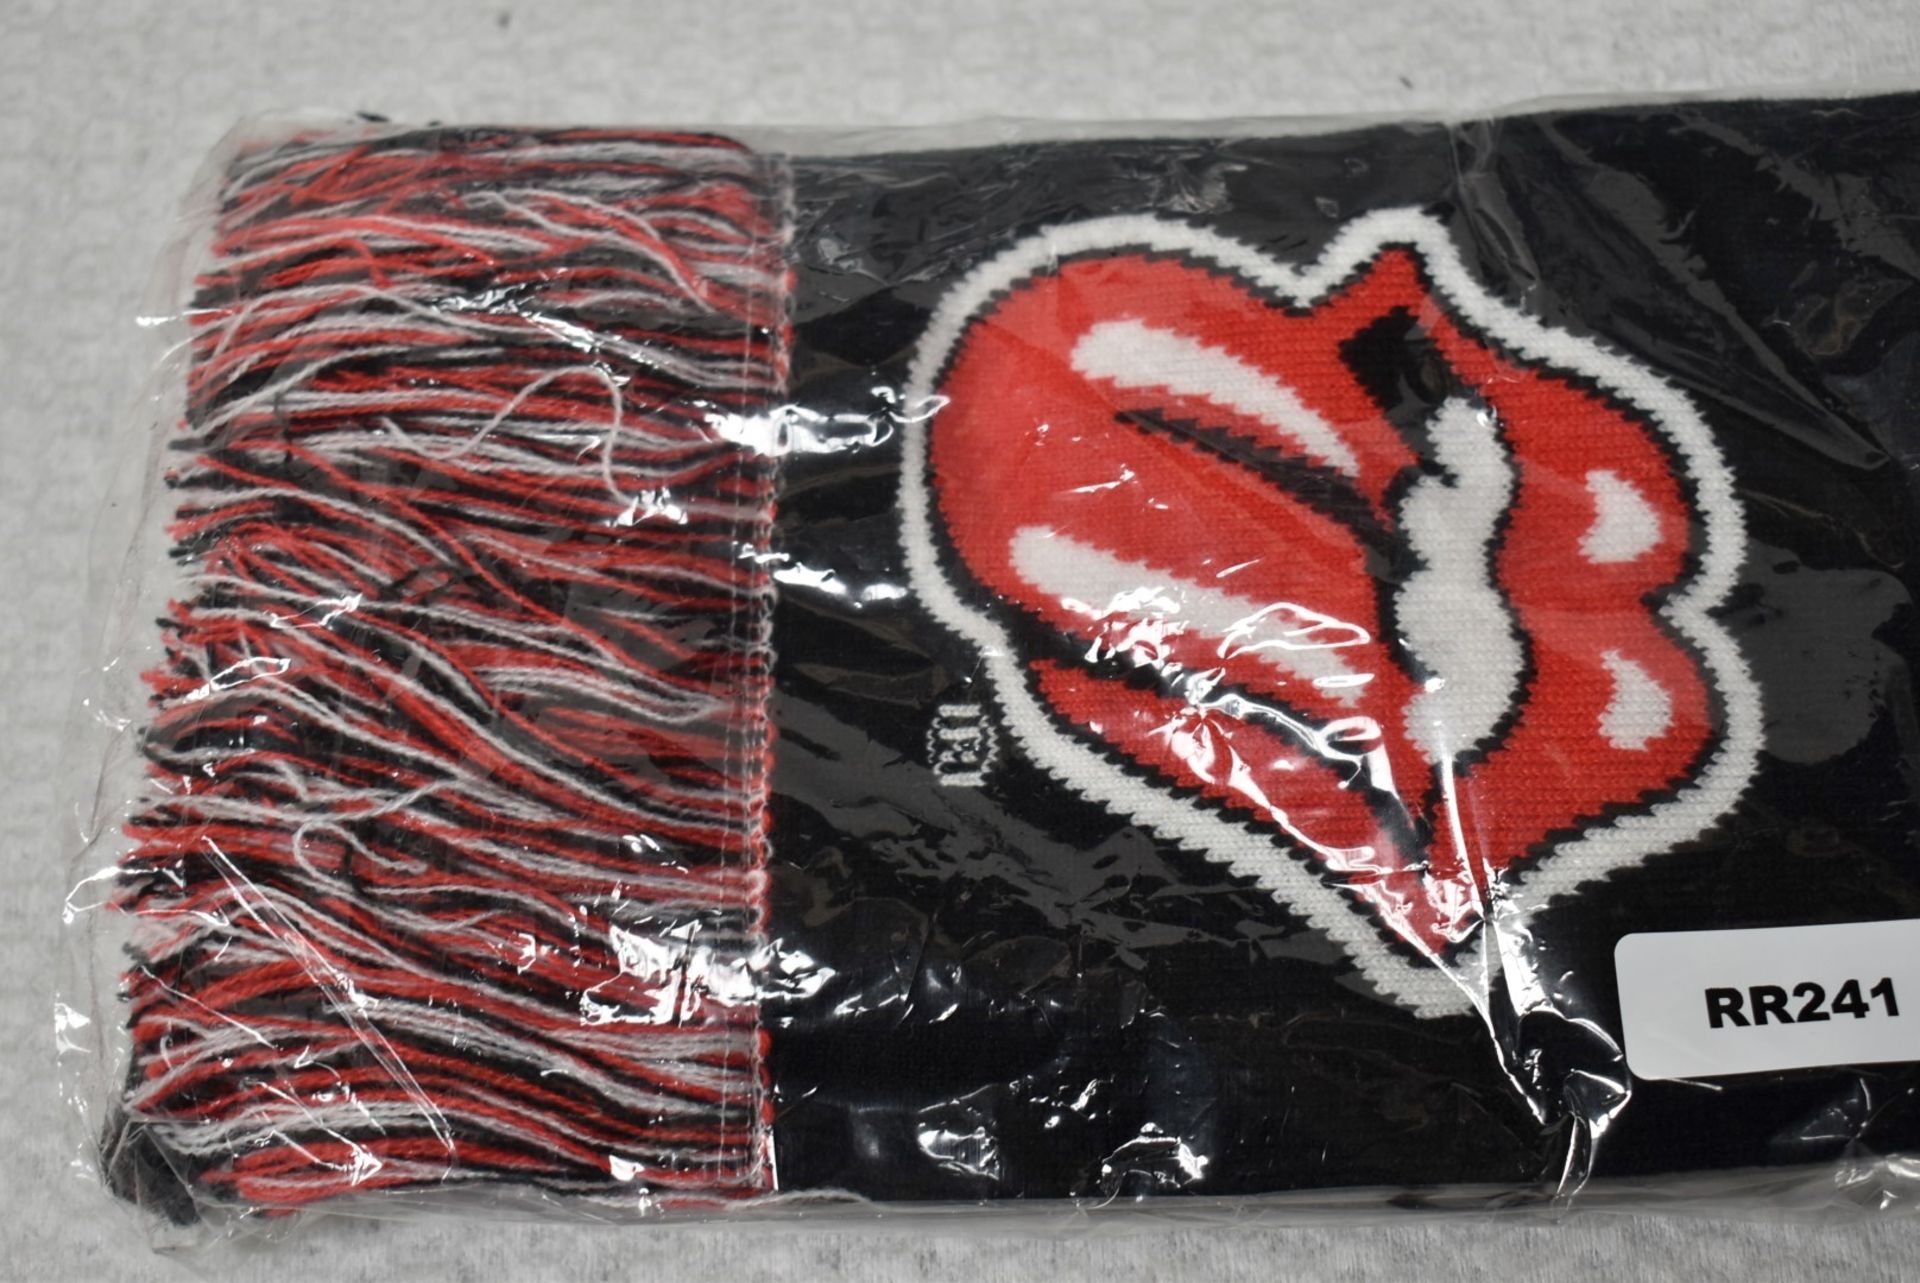 1 x Rolling Stones Scarf - Classic Tongue and Logo Design - Officially Licensed Merchandise - New & - Image 3 of 6